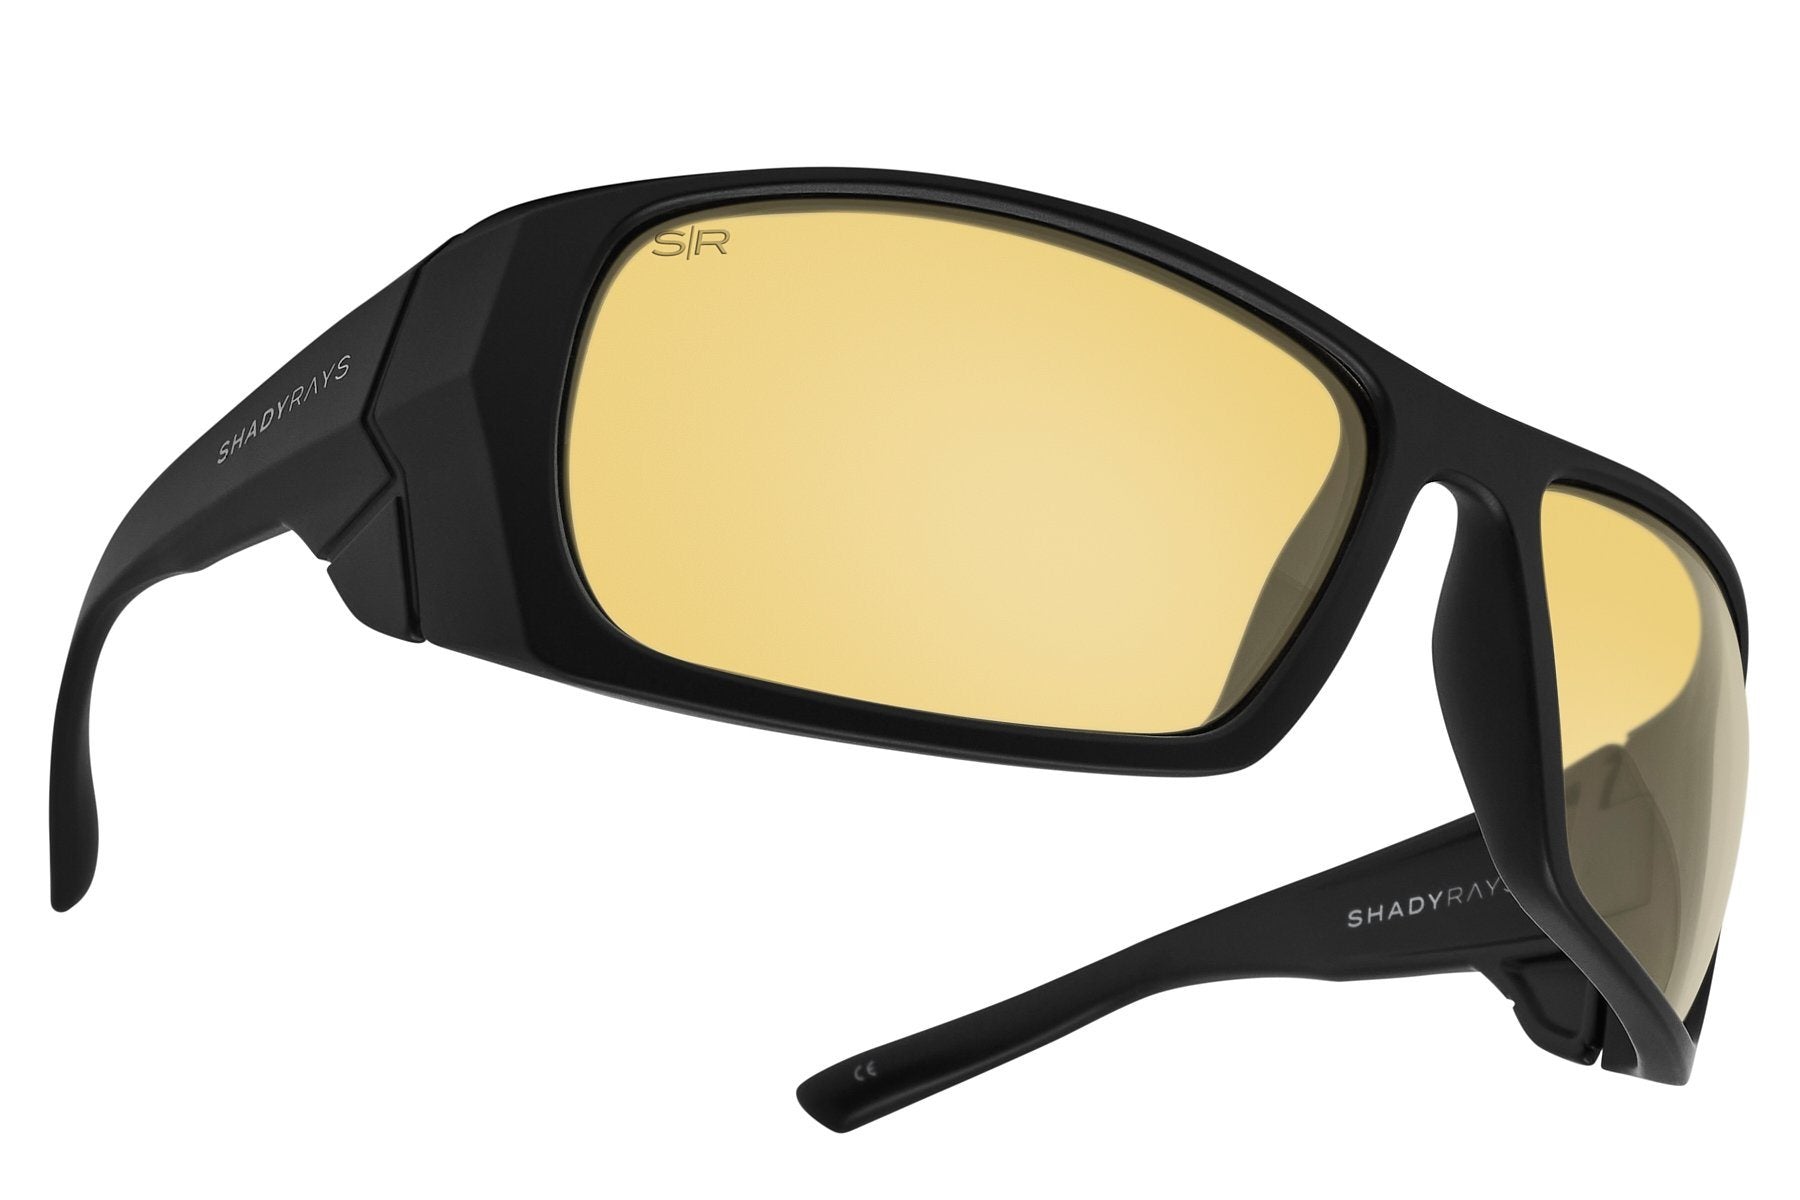 Terrain - Yellow Sunglasses | Matte Black Sunglasses | Best Christmas Gifts | Gifts for The Holidays | Unique Gifts for Friends| Shady Rays